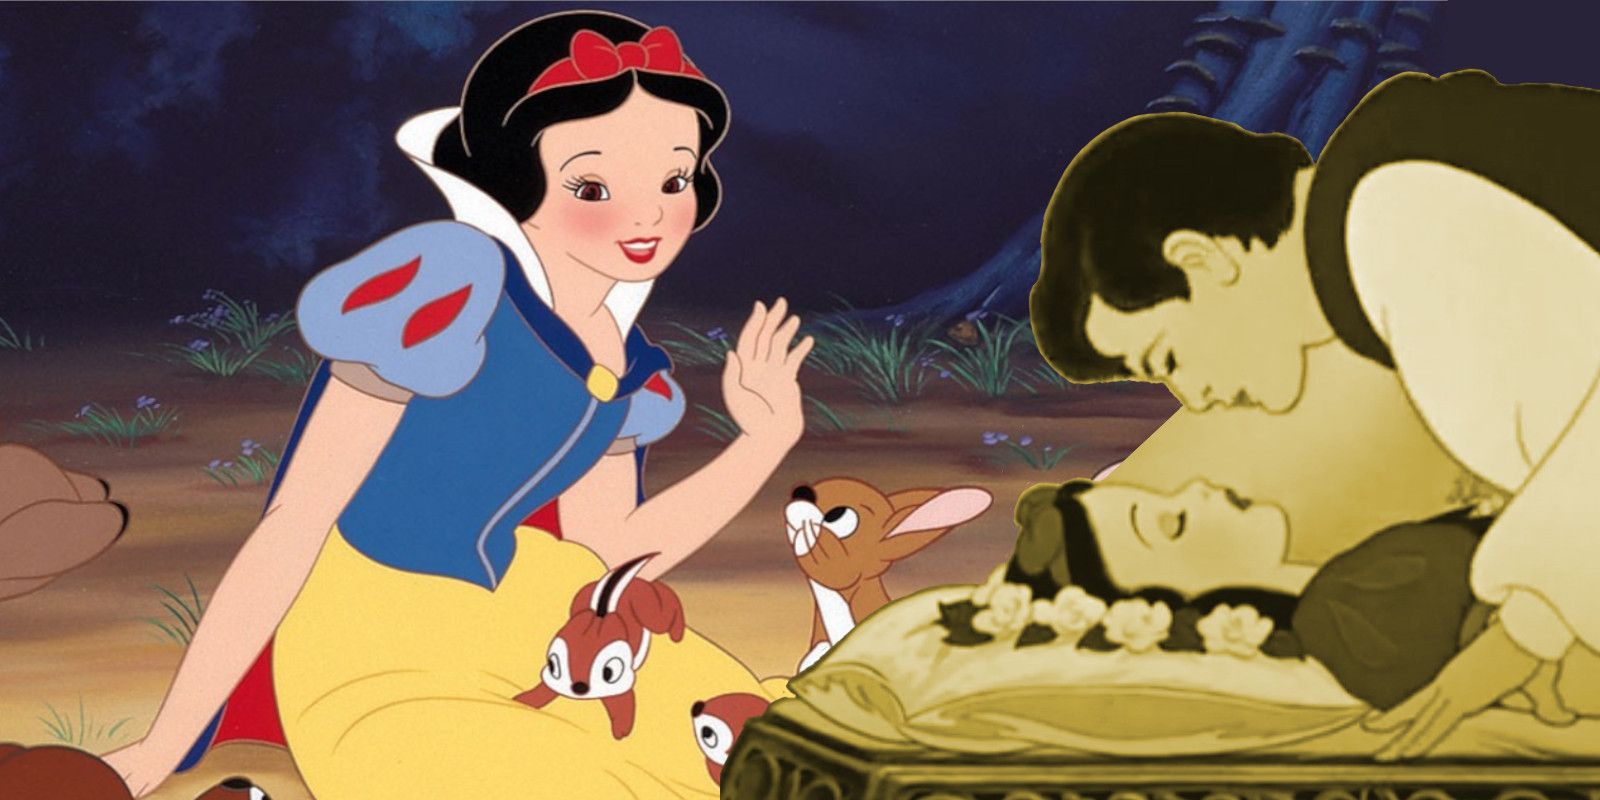 snow white: Disney's 'Snow White and the Seven Dwarfs': First full-length  animated film got released on this day in history - The Economic Times